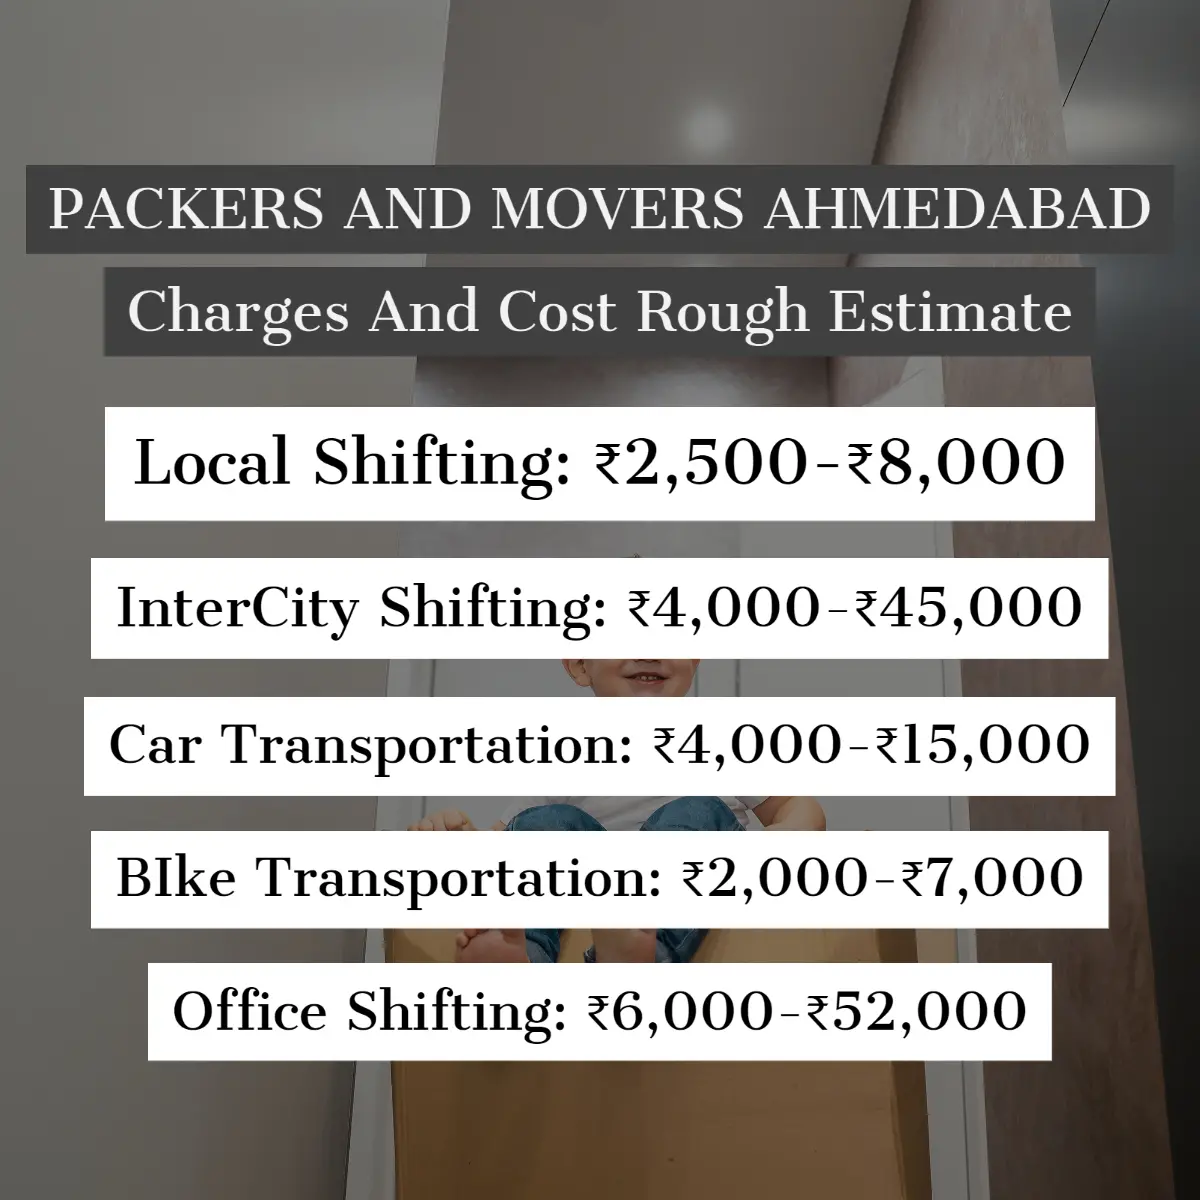 Packers and Movers Ahmedabad Charges